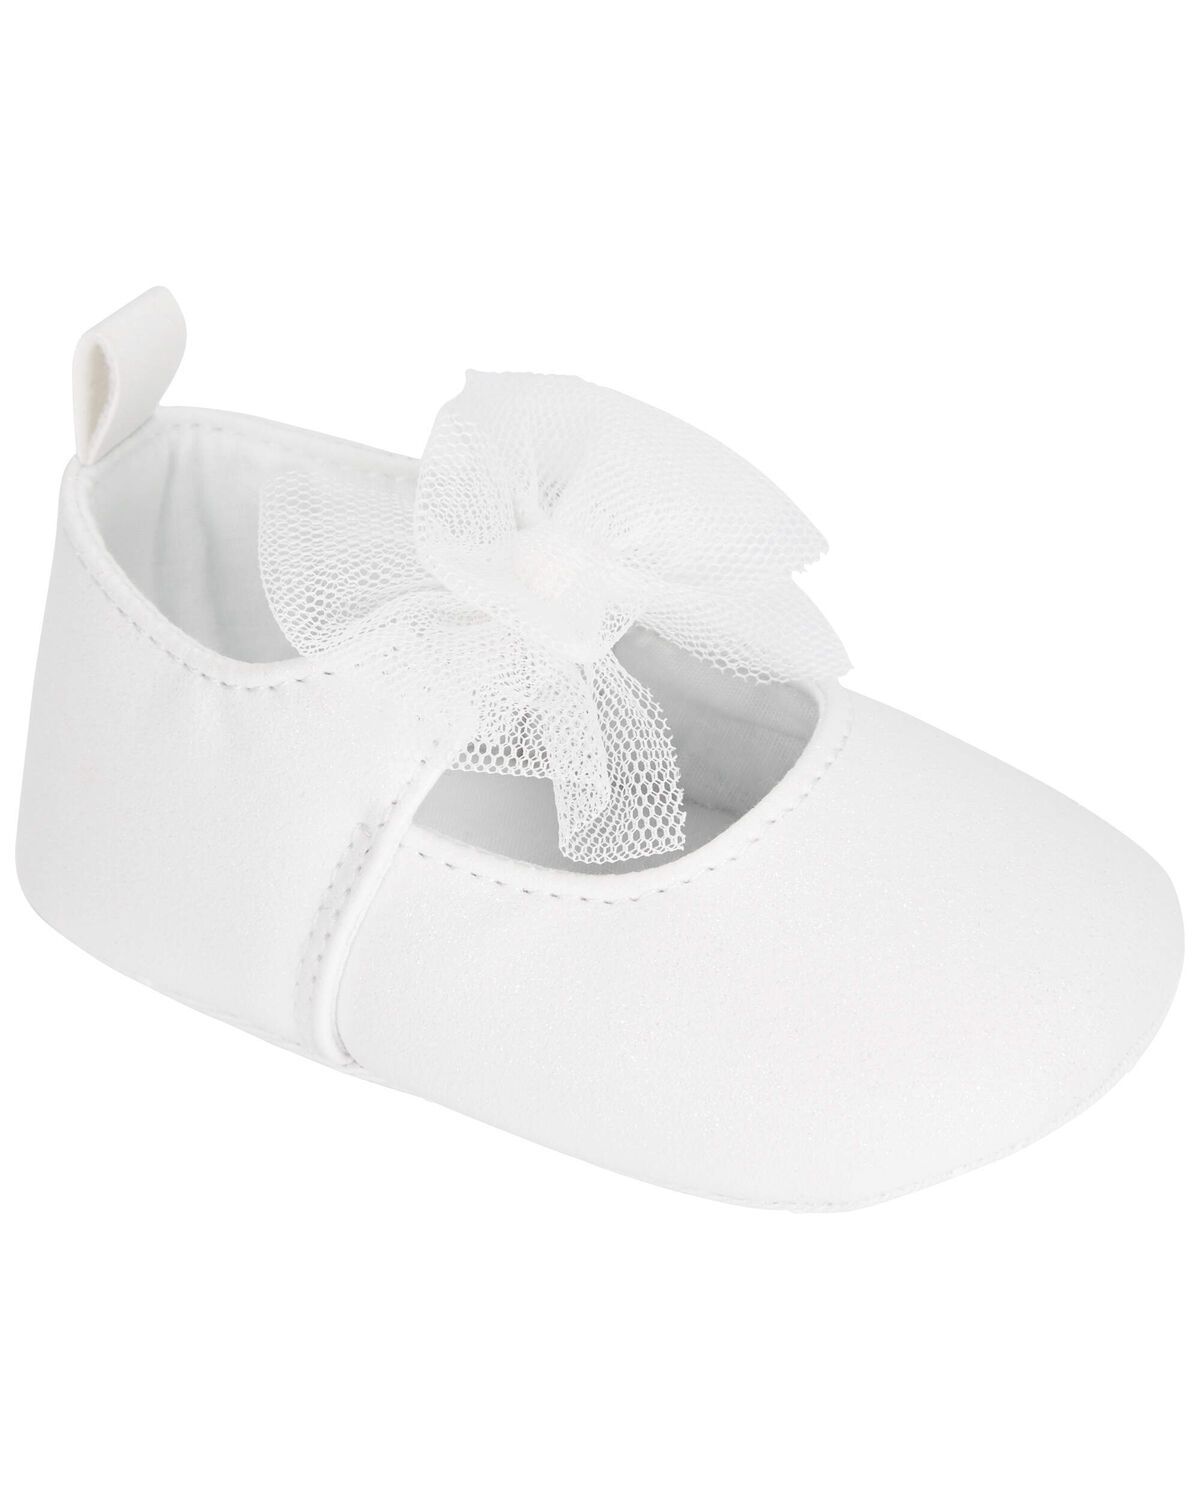 Baby Mary Jane Dress Shoes | Carter's